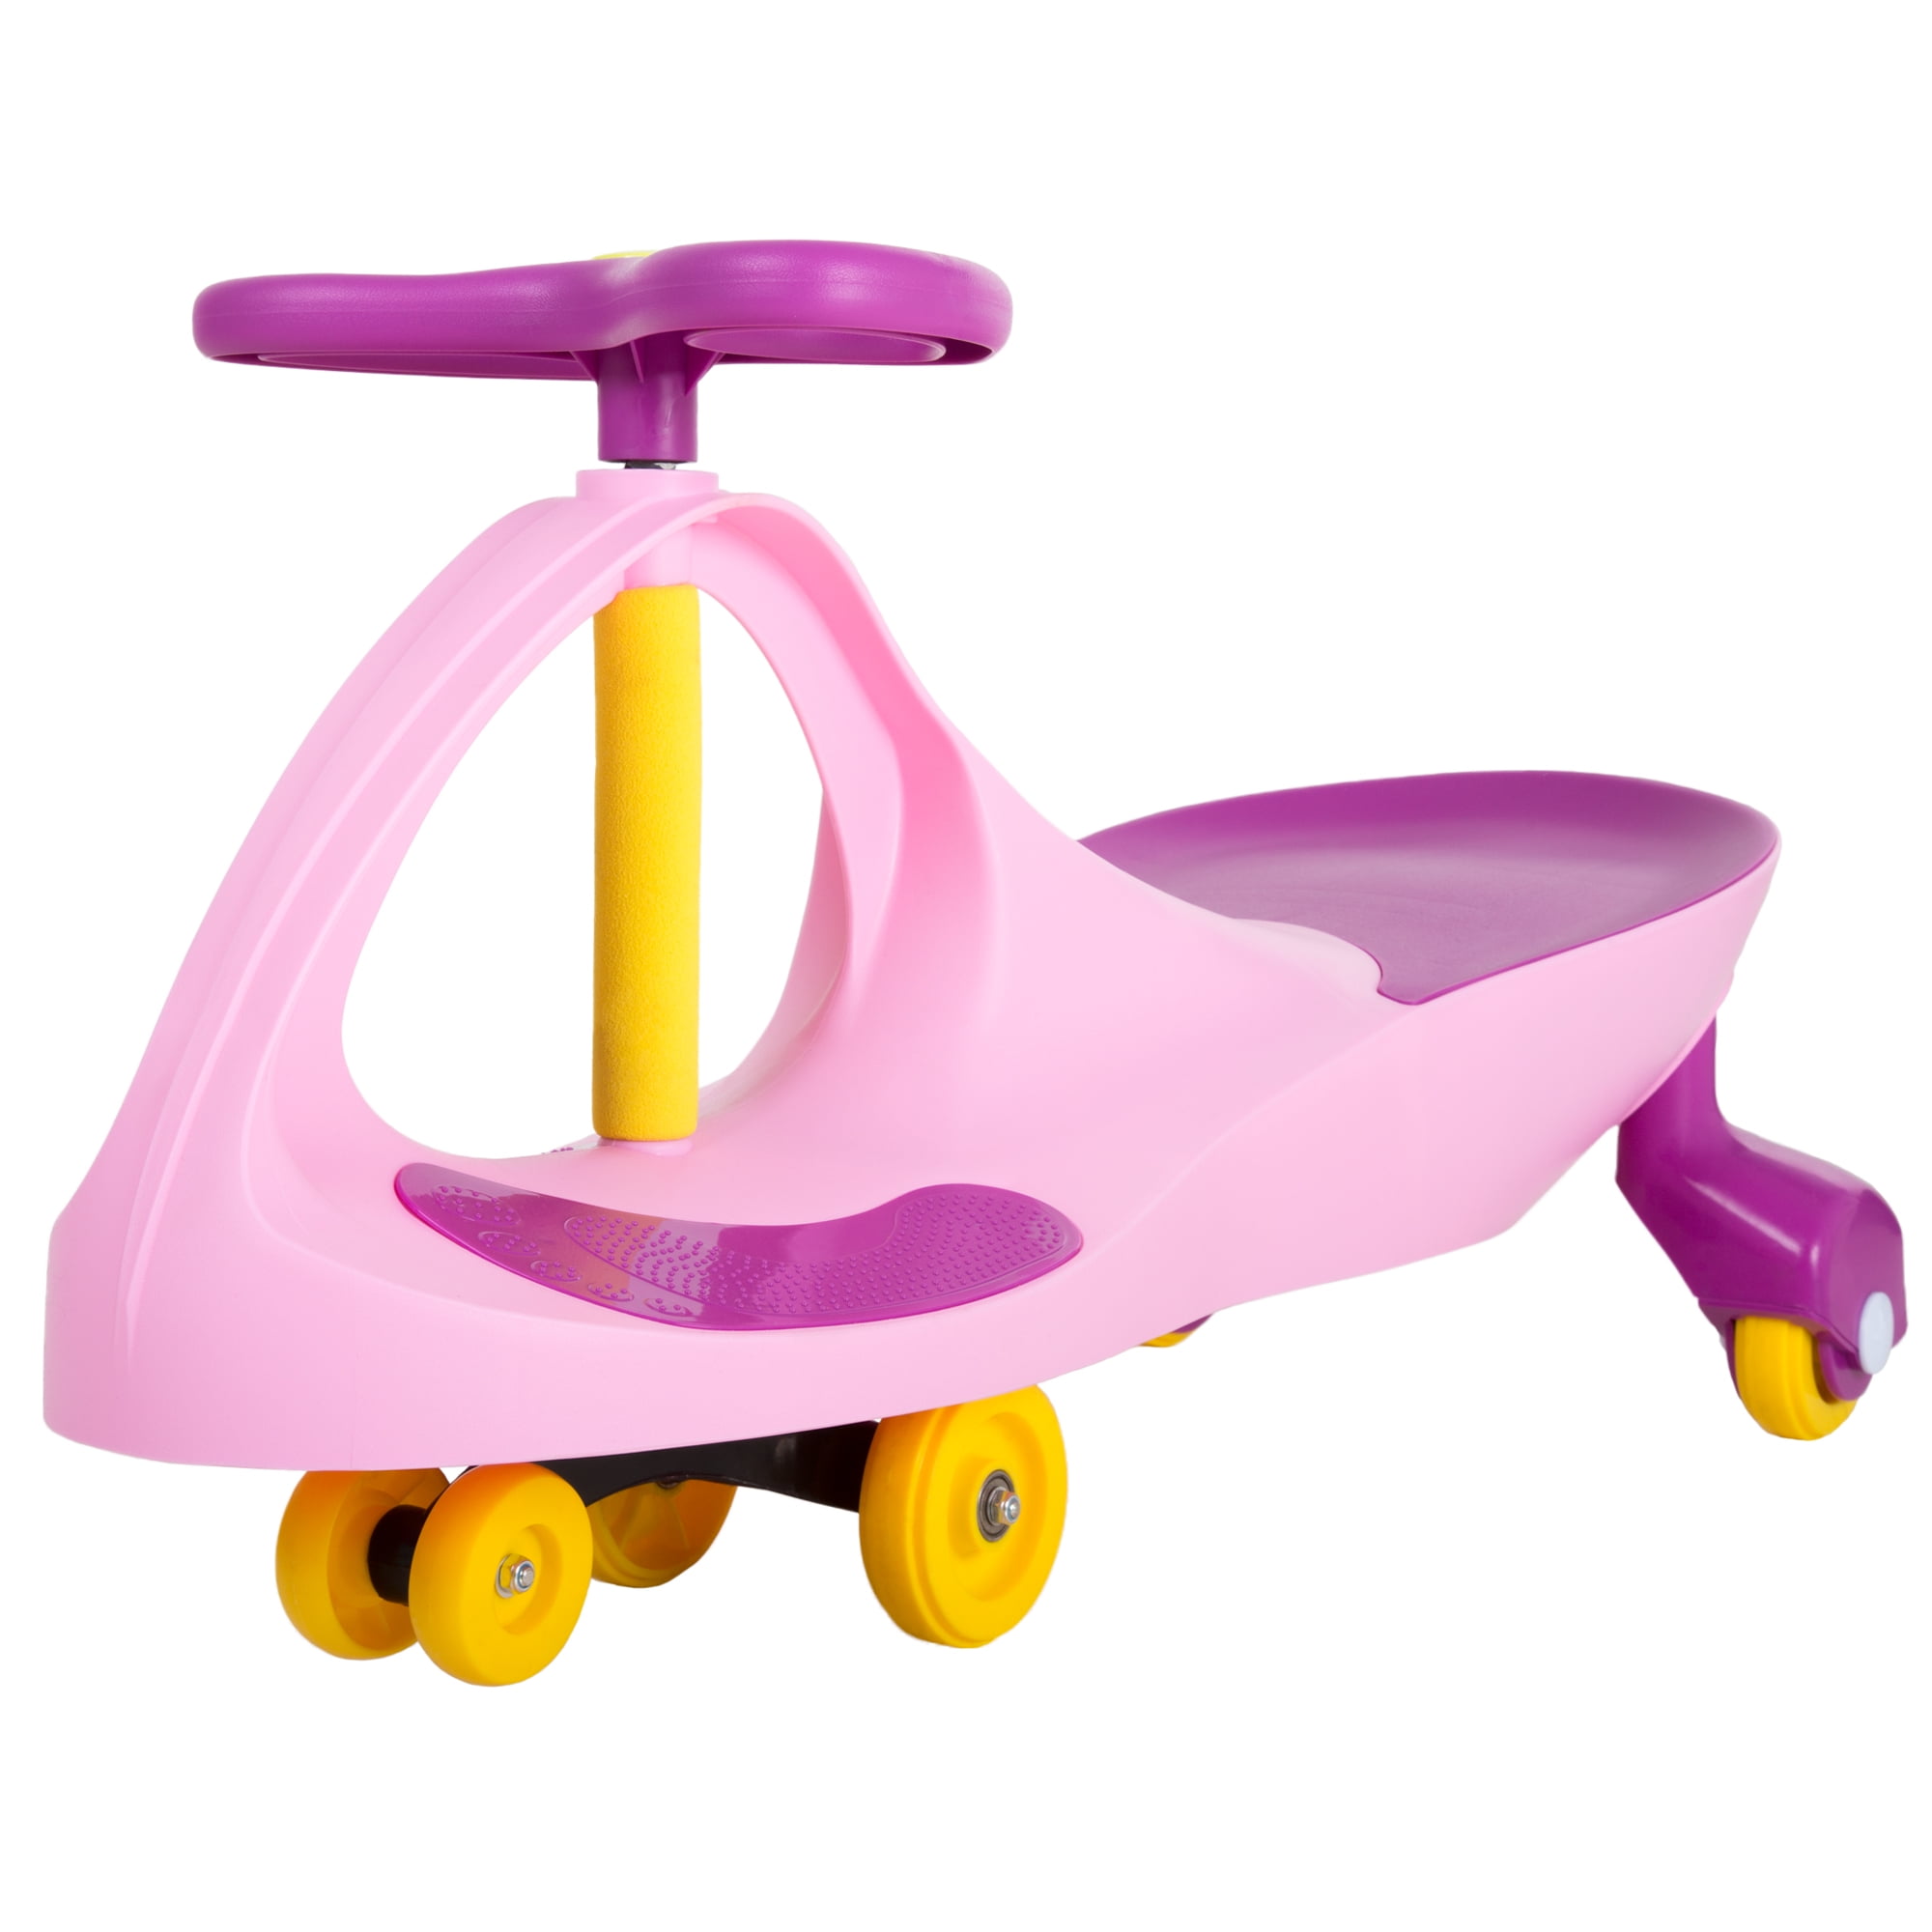 Ride on Wiggle Car 2 Year Old and Up Ride on Toys for Boys and Girls JJLL Ride on Toy Blue 